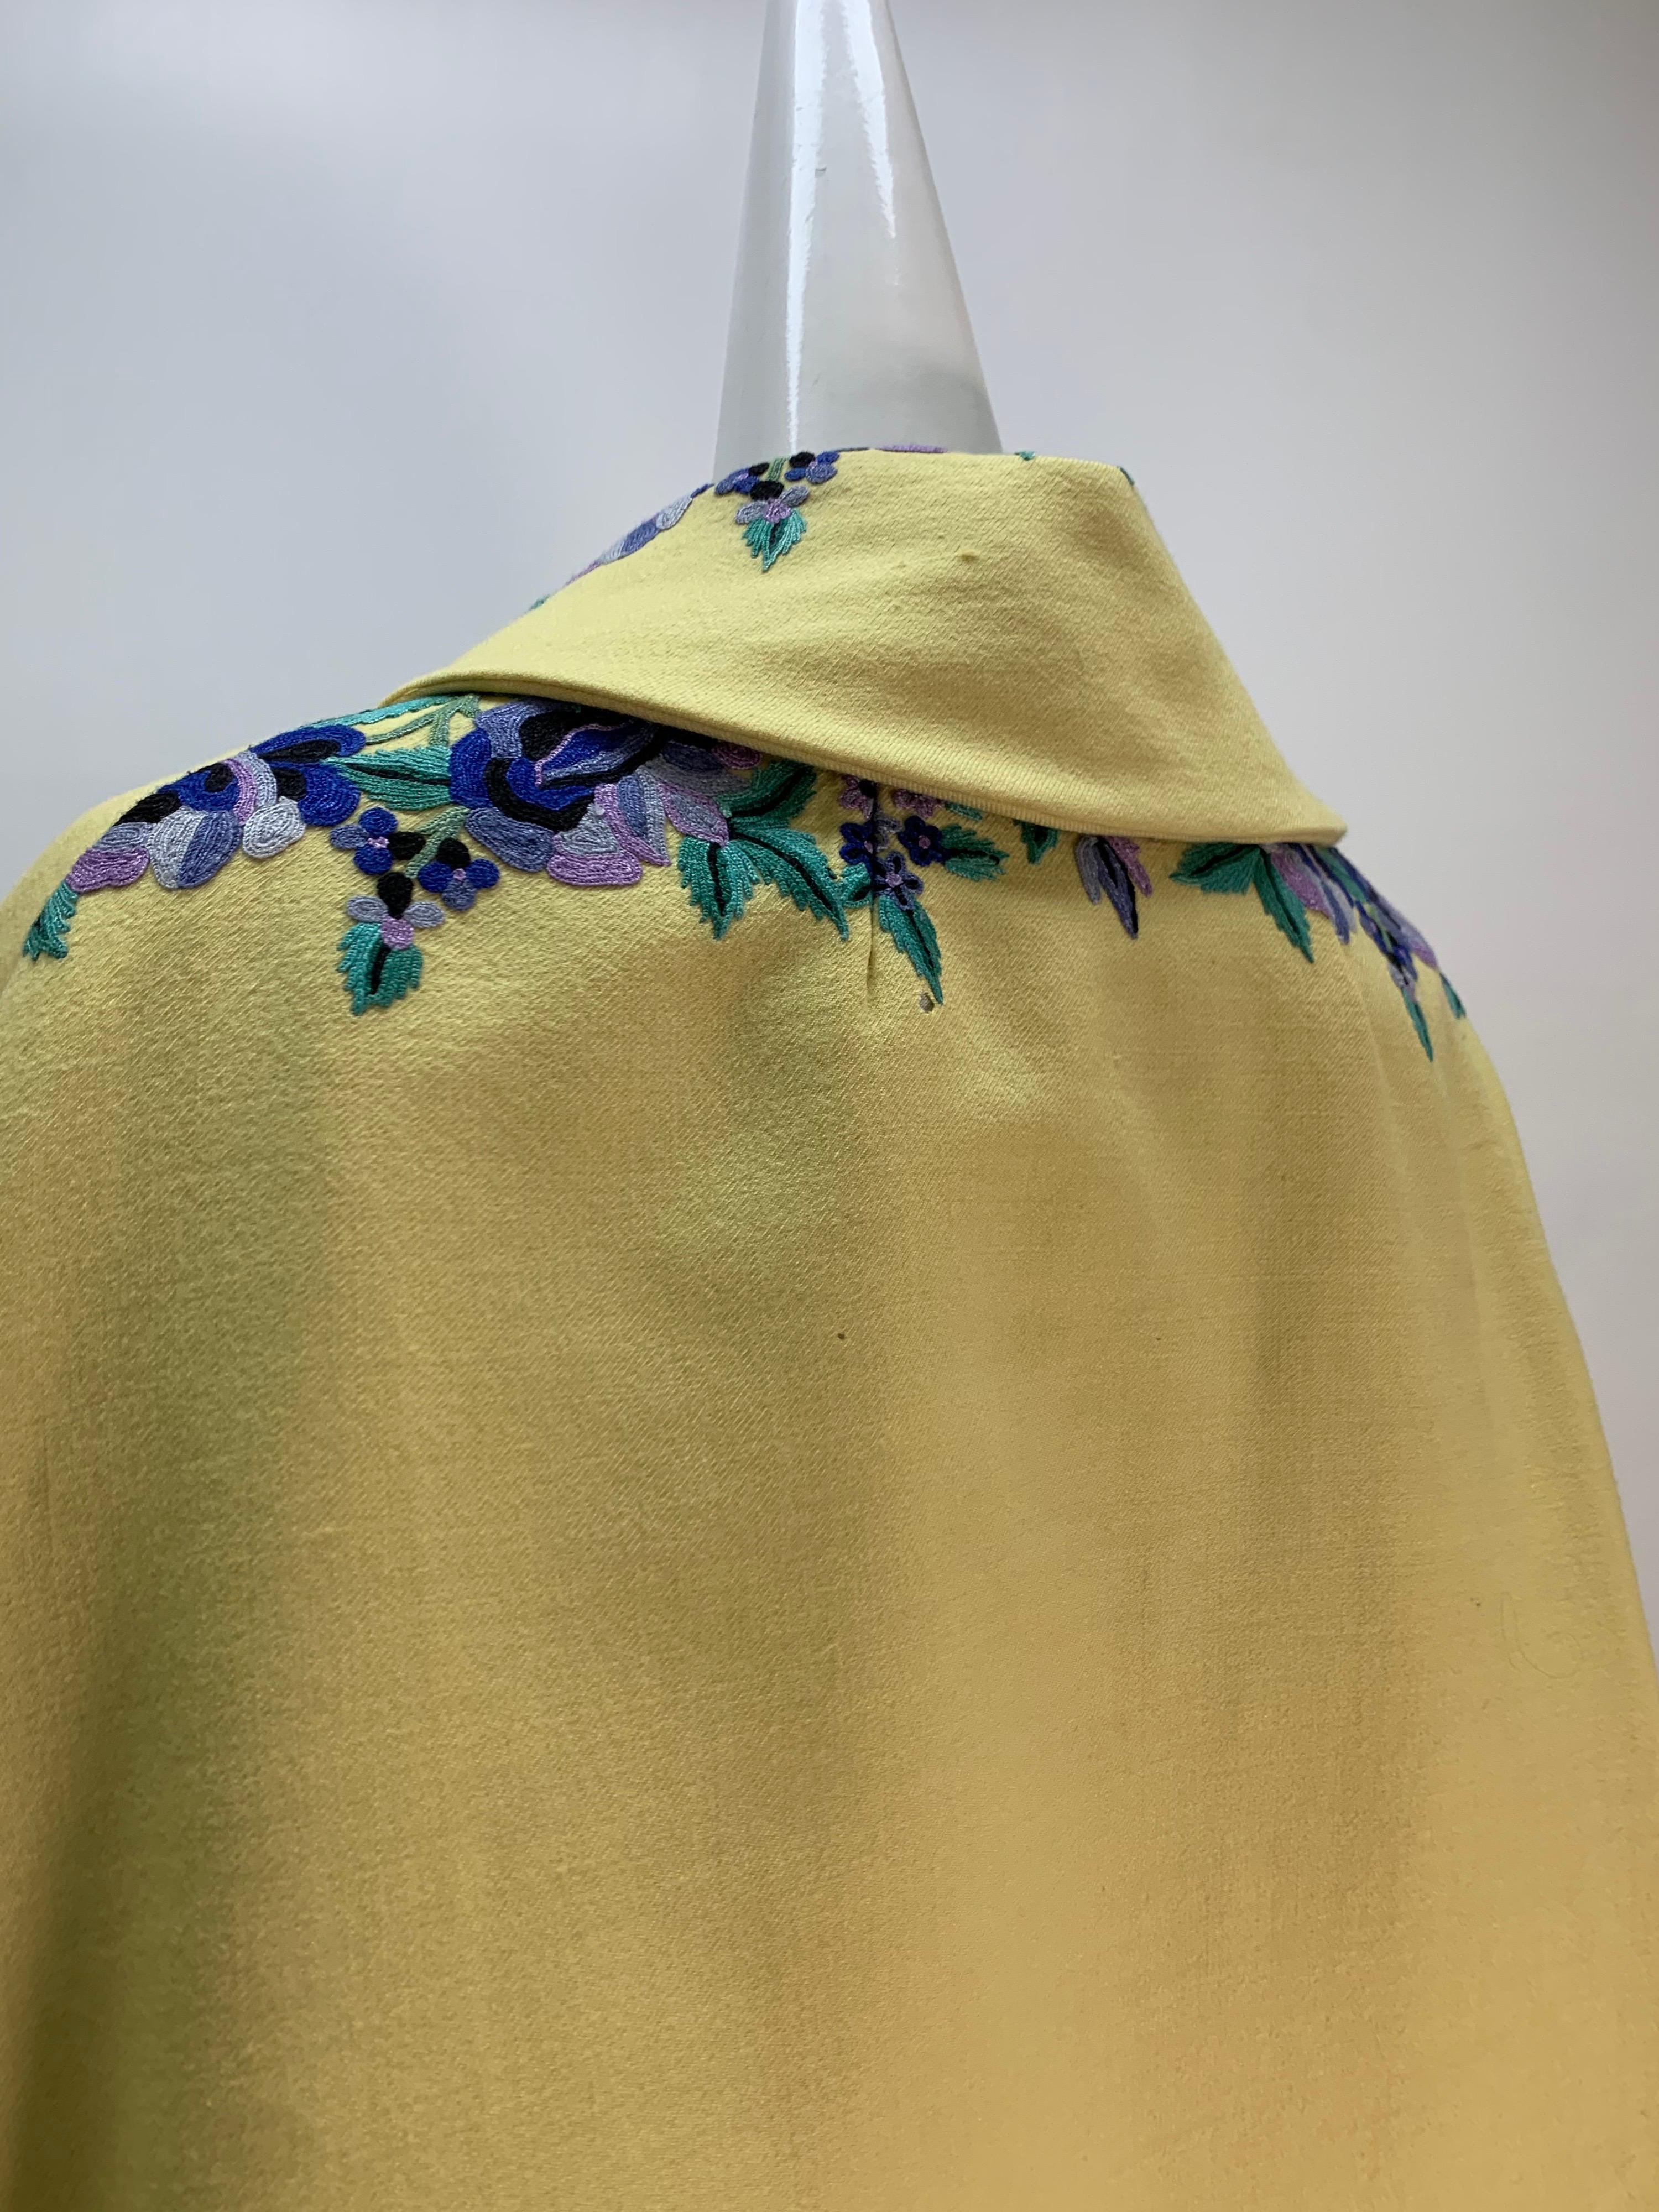 1960s Profils Du Monde Citrine Wool Swing Coat W/ Crewel Floral Embroidery Front In Excellent Condition For Sale In Gresham, OR